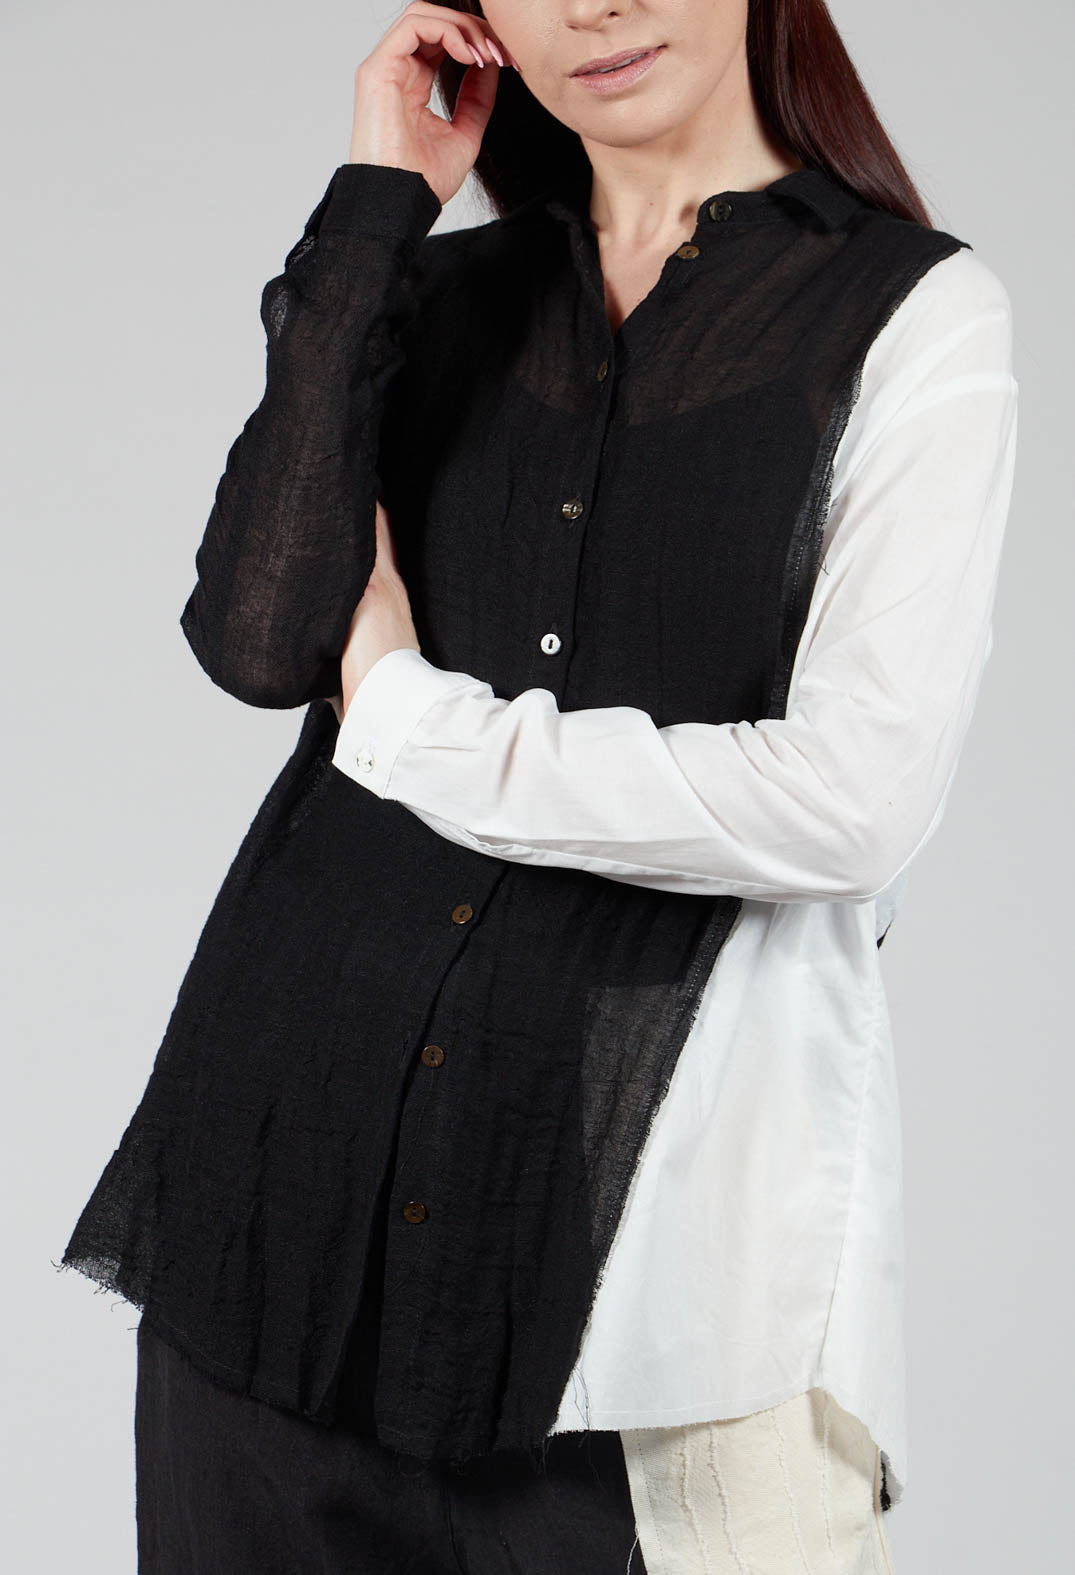 Dual Fabric Shirt in Black and White